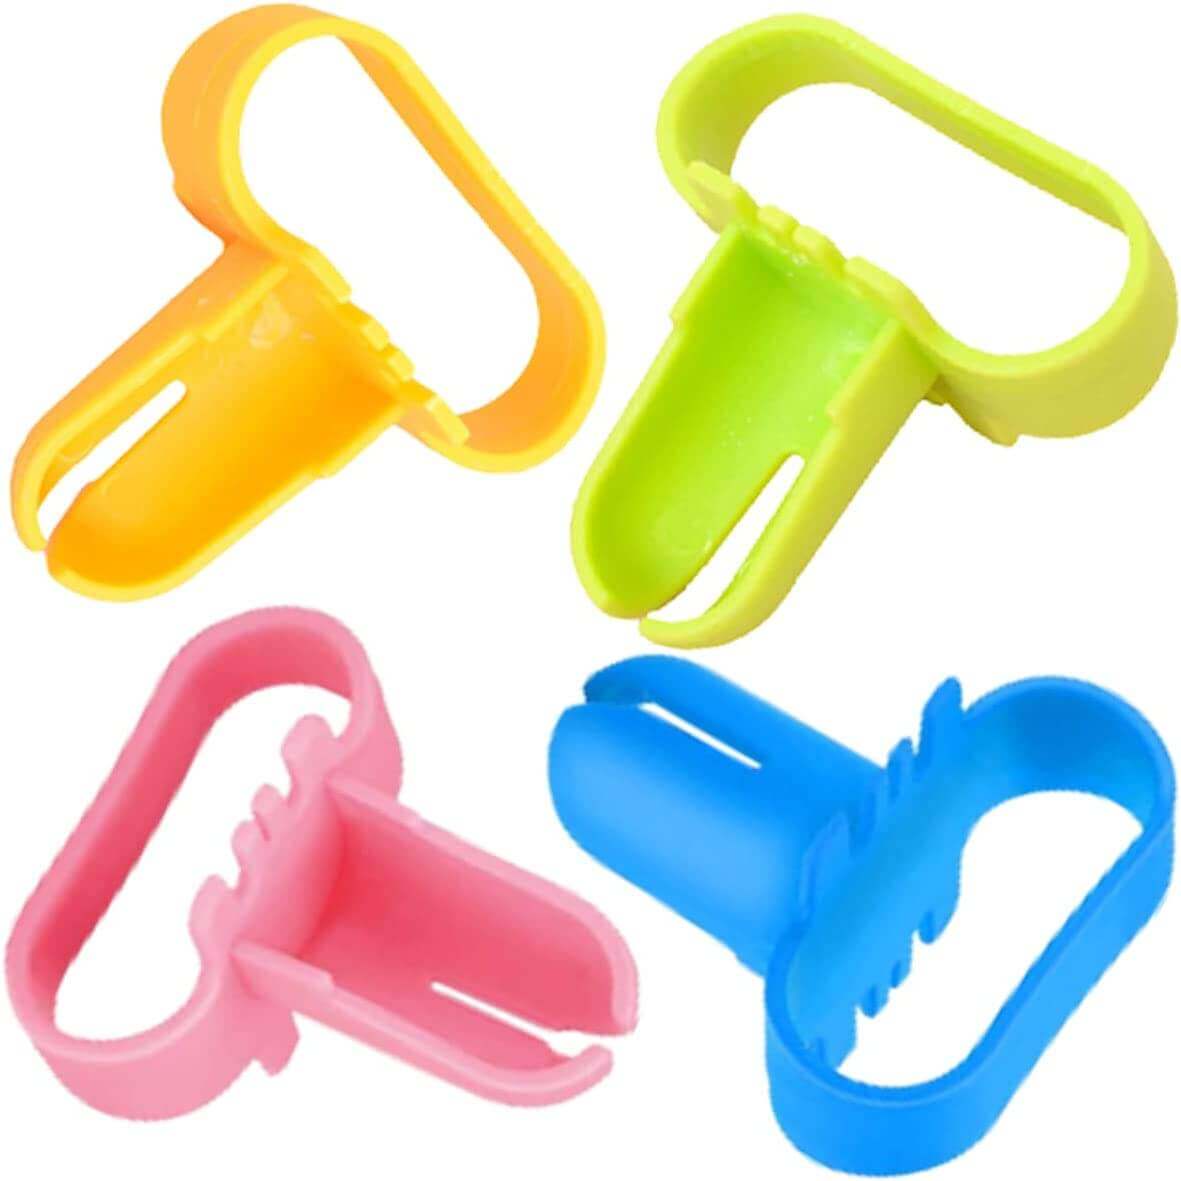 Balloons Knot Tool